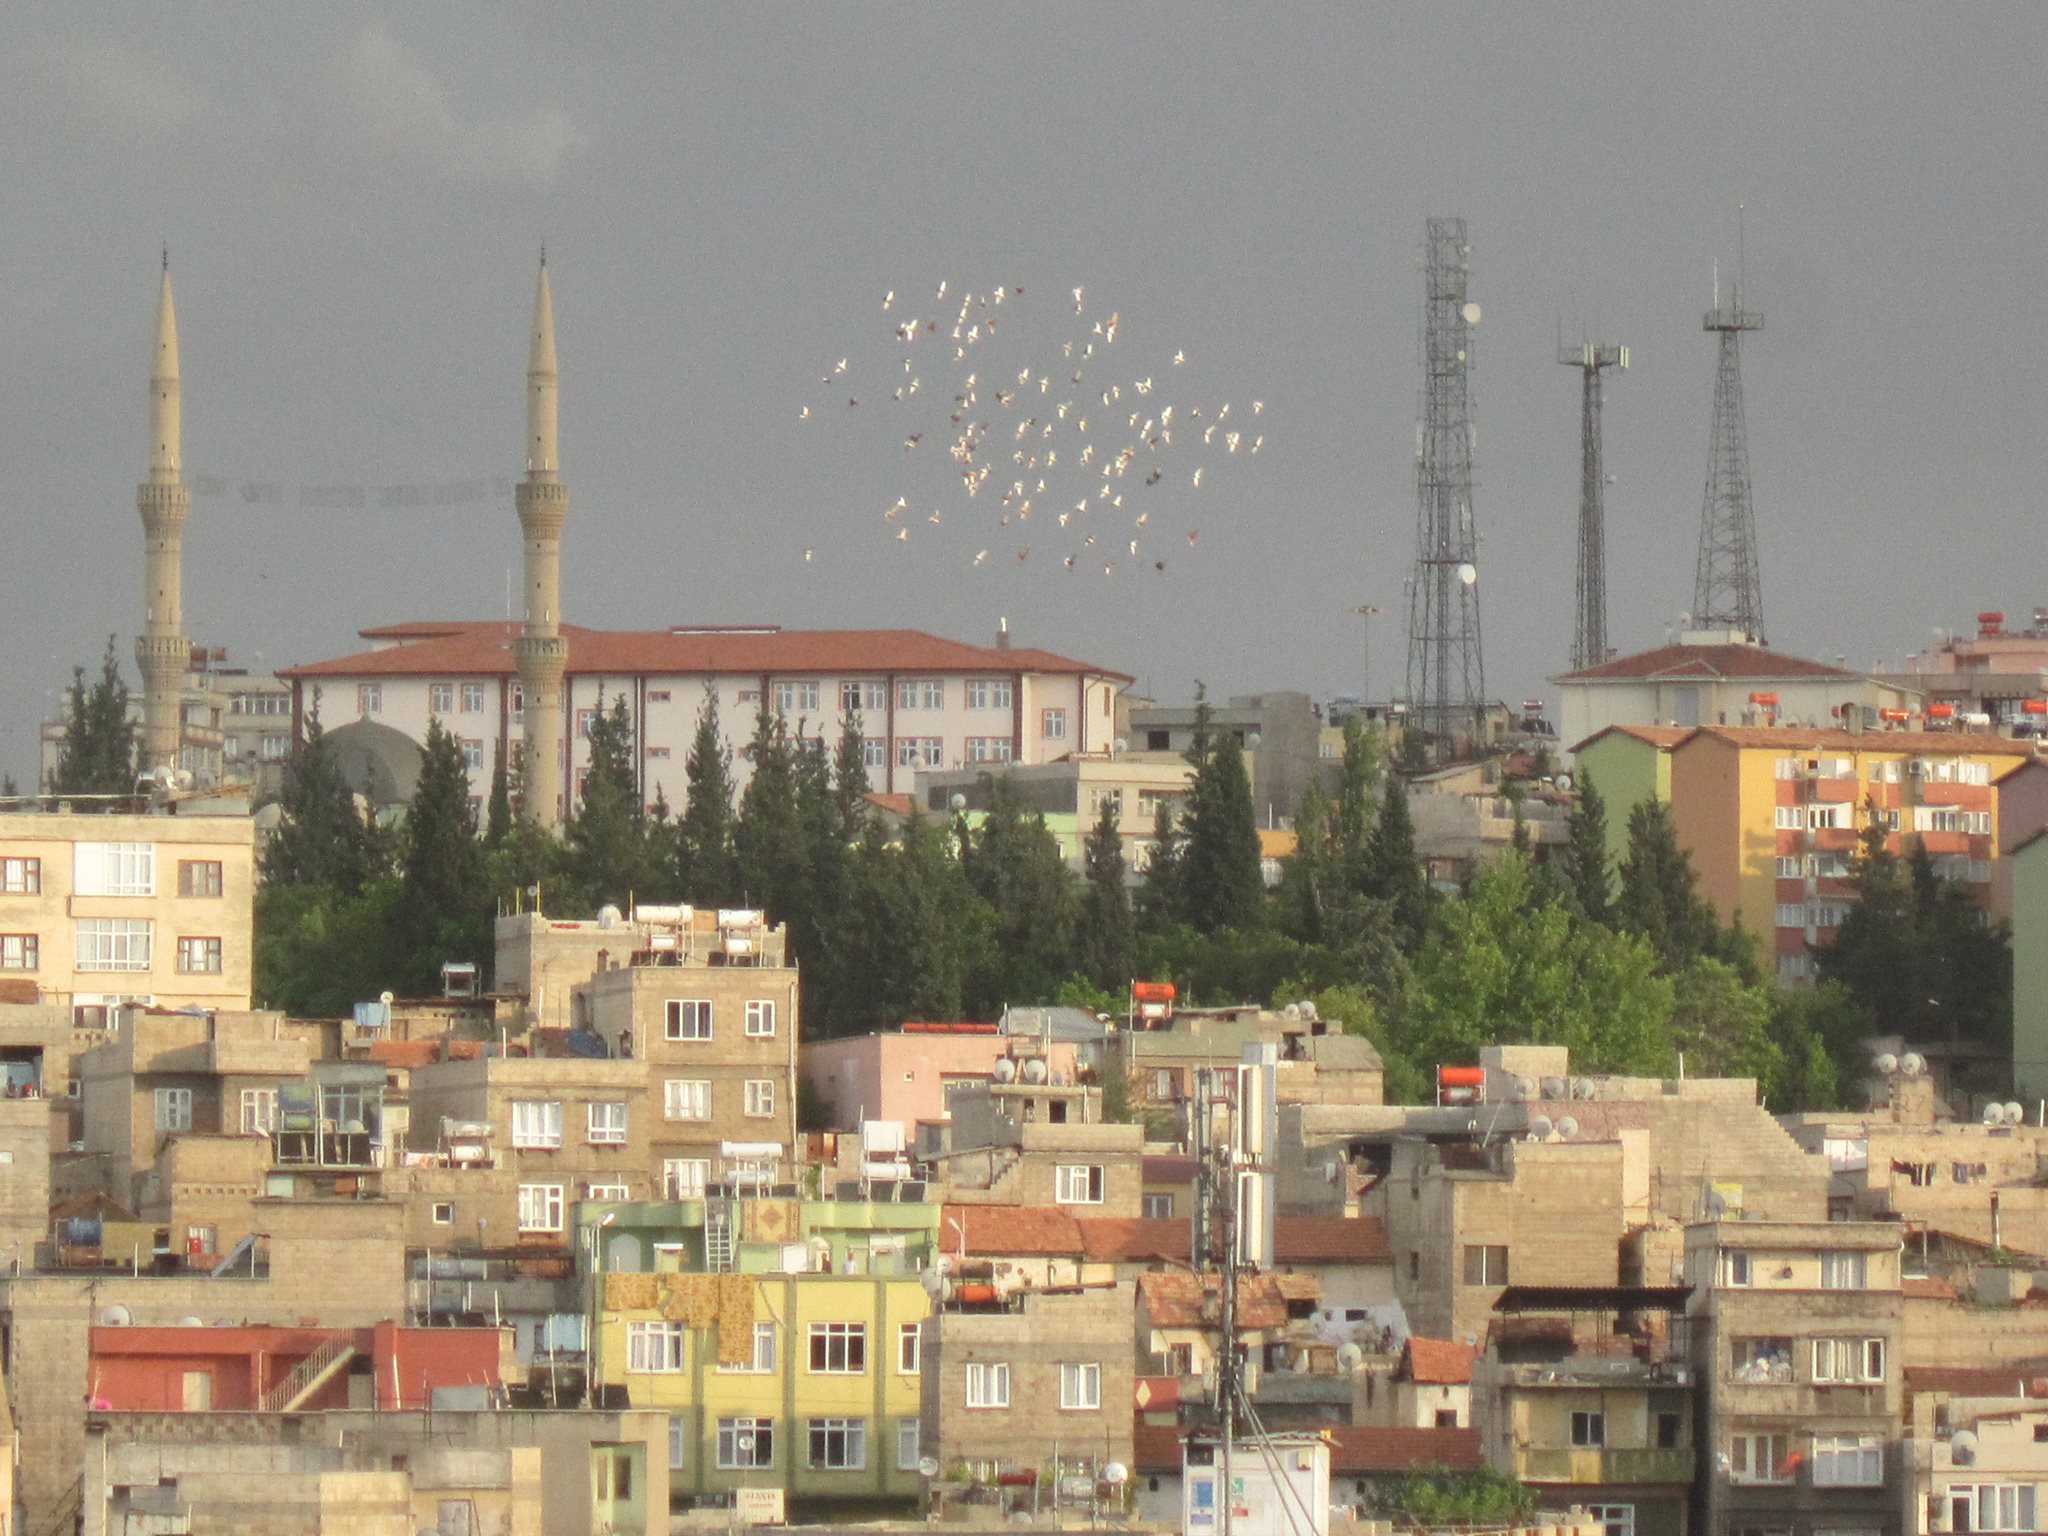 A flock of birds flies over Gaziantep, a mosque is in the background.